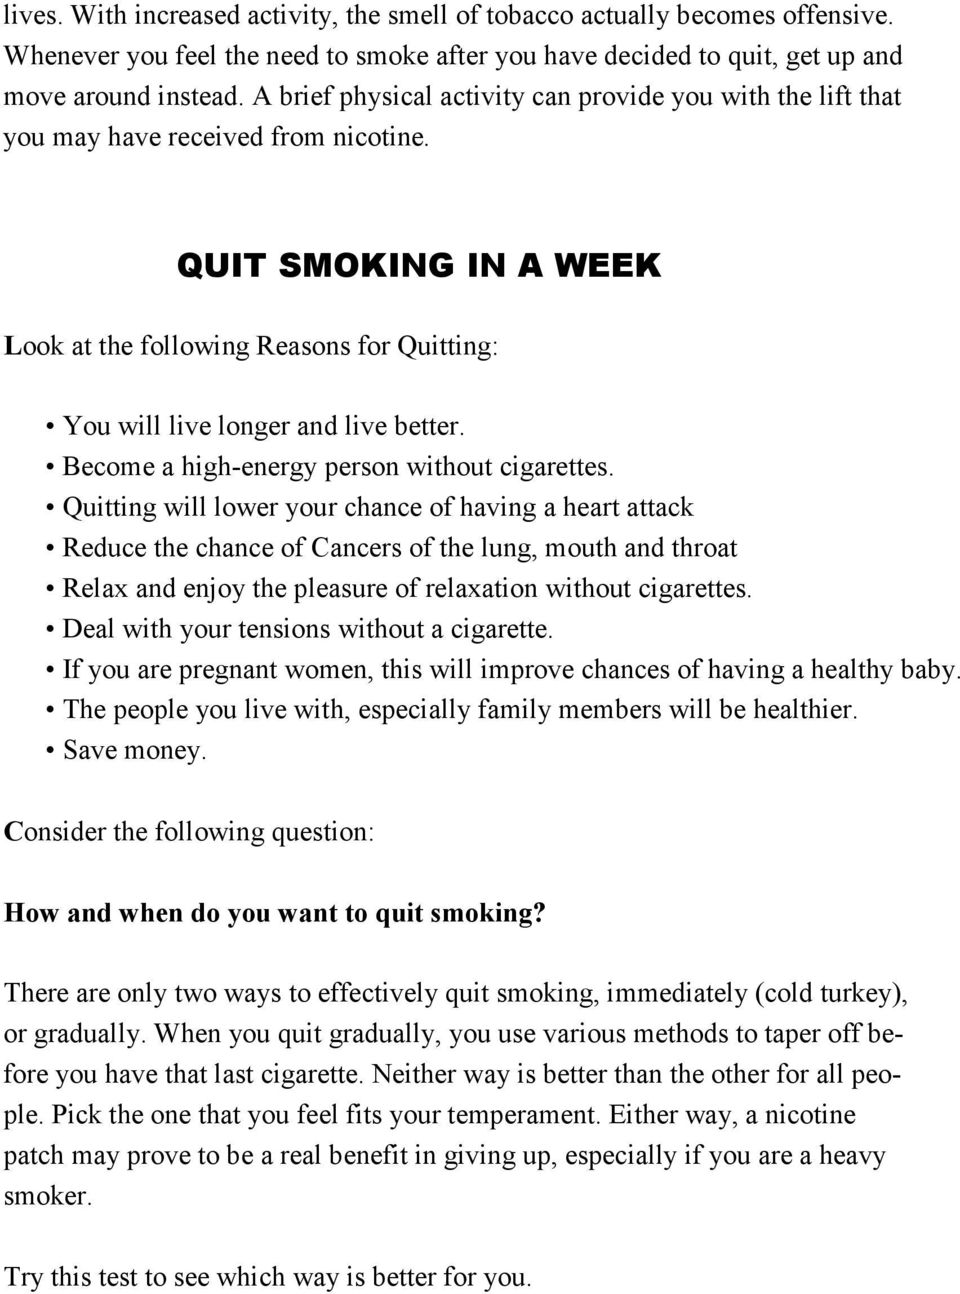 QUIT SMOKING IN A WEEK Look at the following Reasons for Quitting: You will live longer and live better. Become a high-energy person without cigarettes.